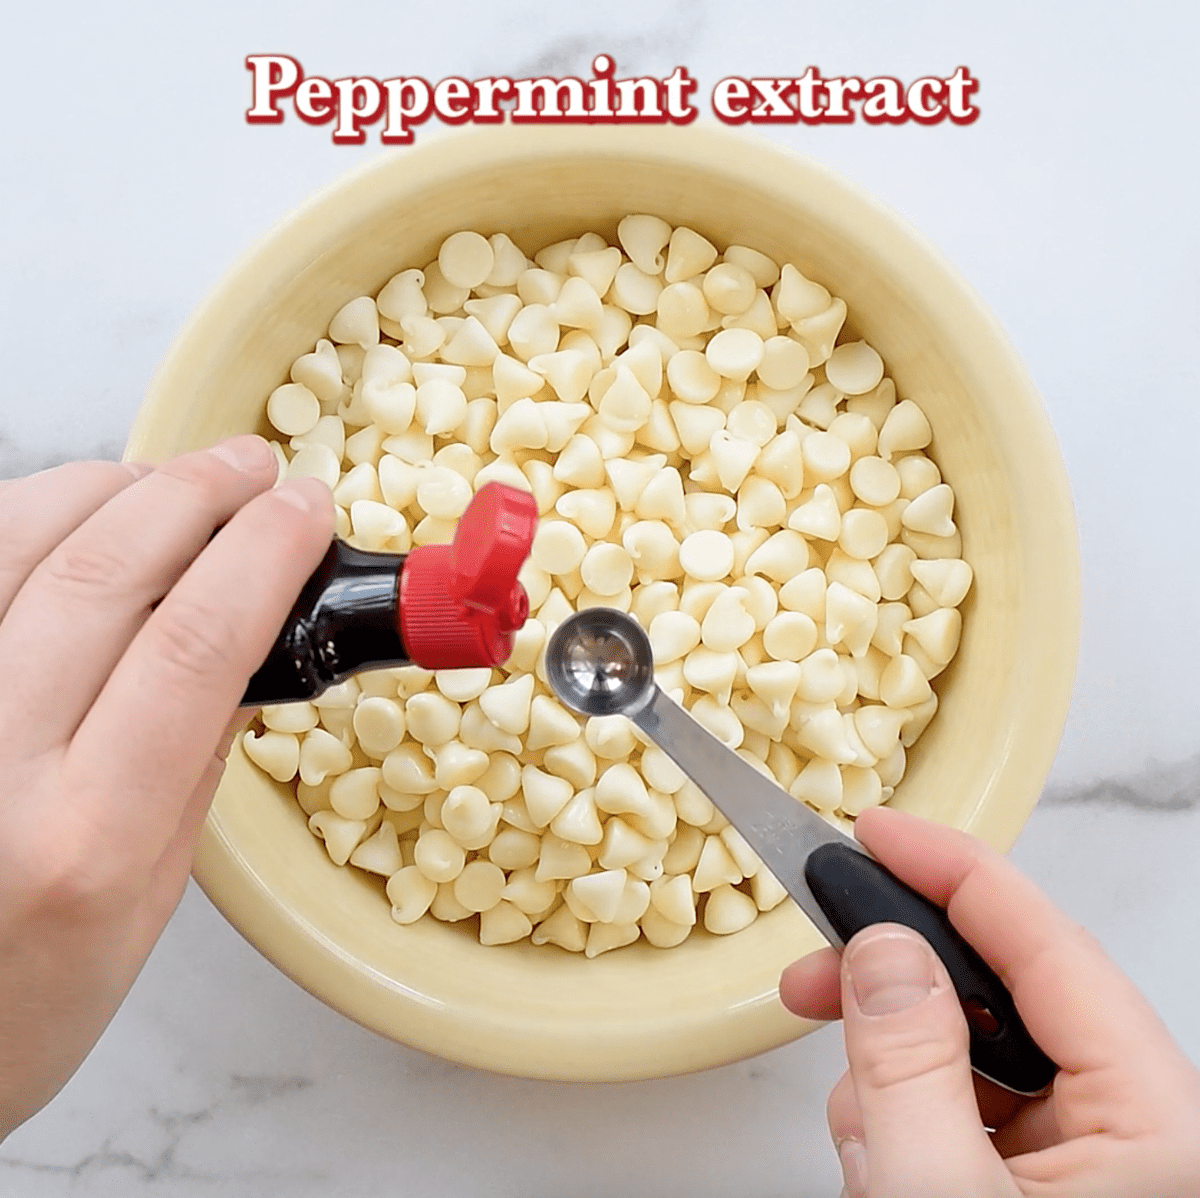 white chocolate chips with peppermint extract in cream bowl